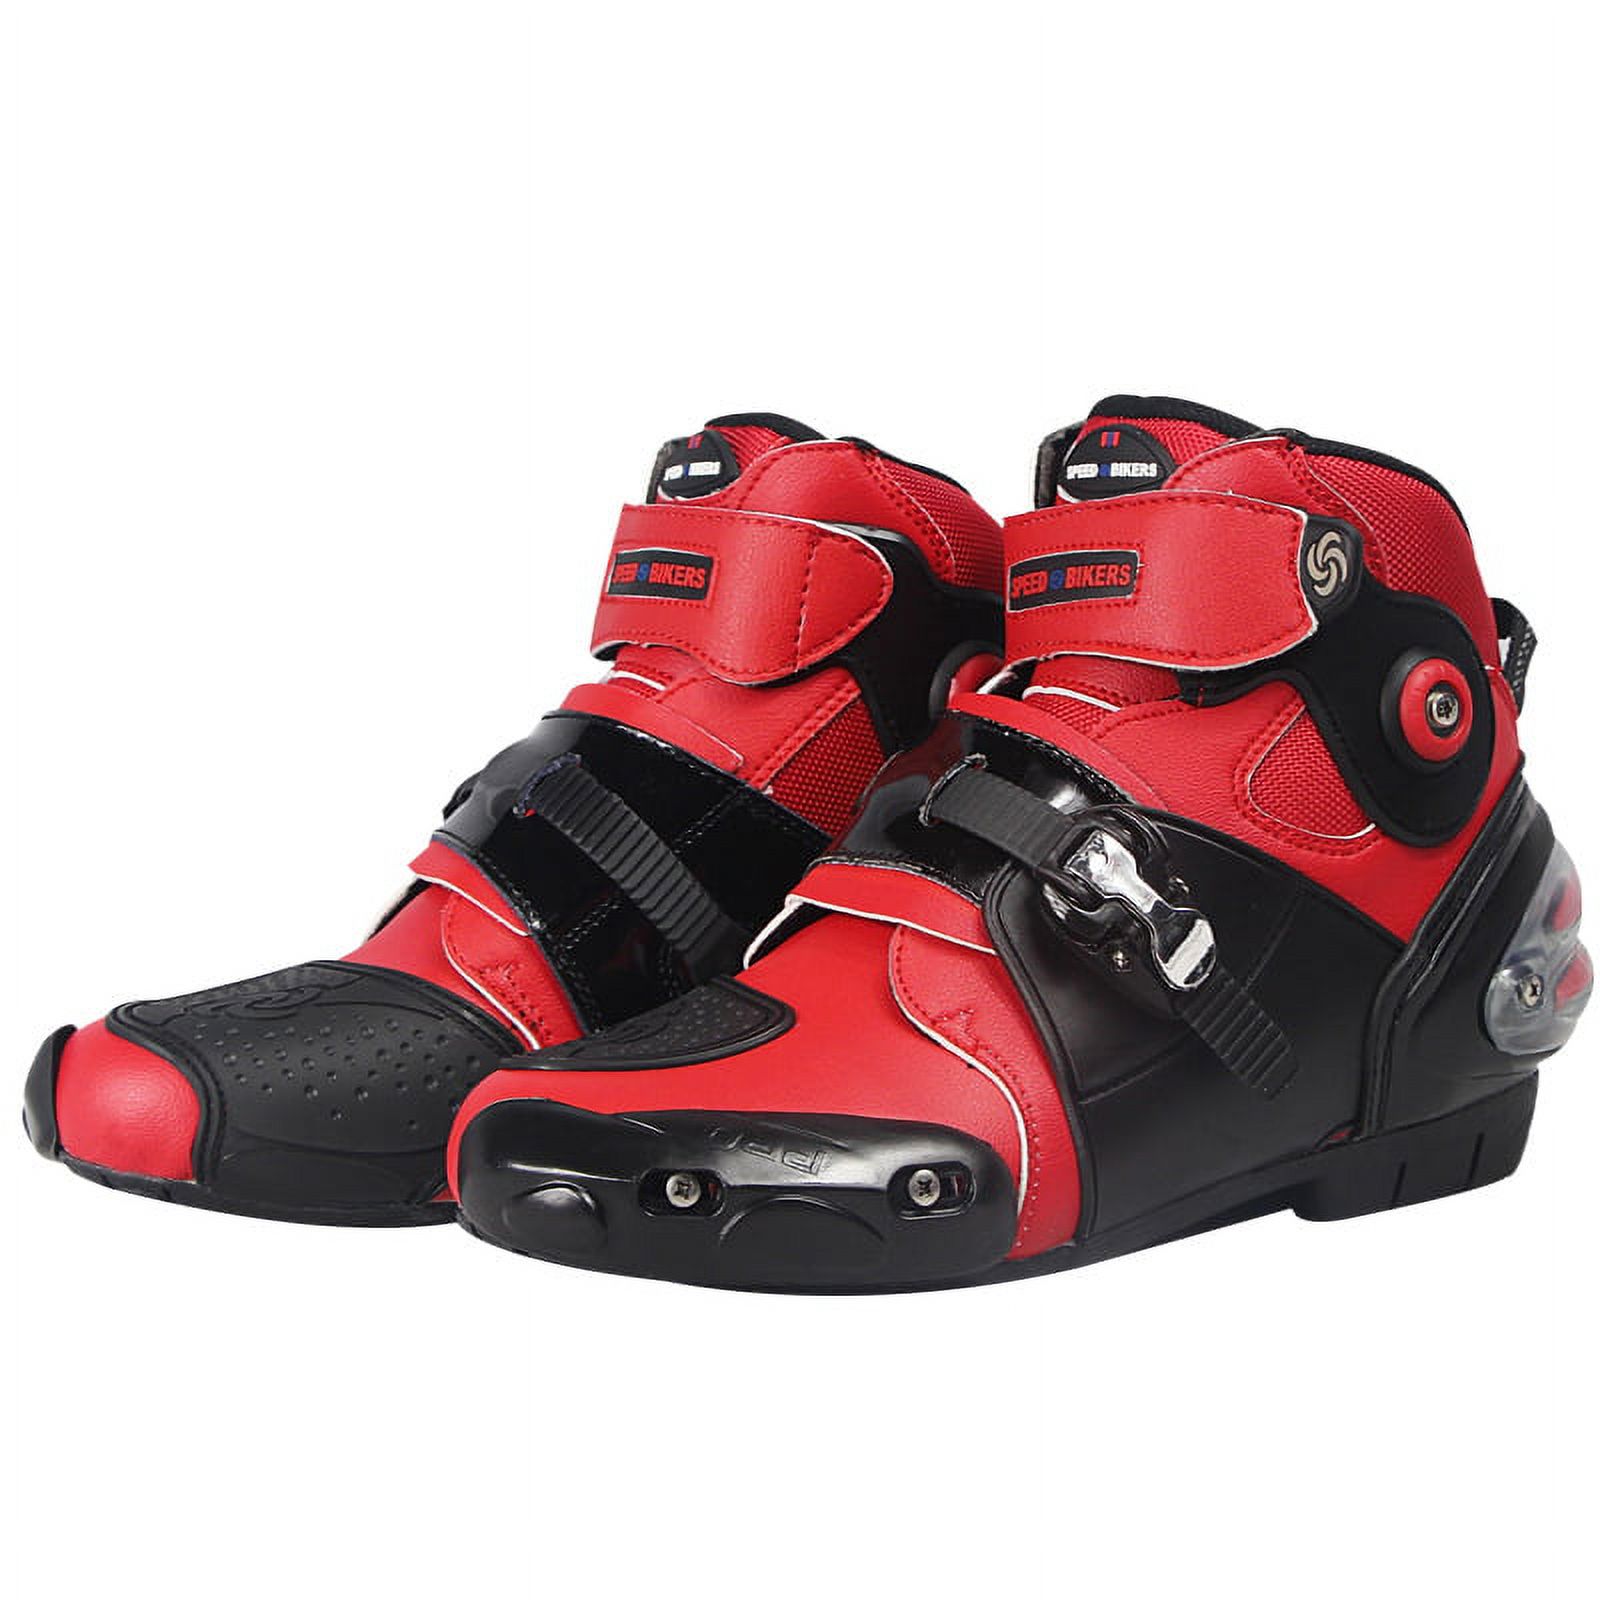 Men Soft Motorcycle Boots Biker Waterproof Speed Motocross Boots Non-slip Motorcycle Shoes Color:red Shoe US Size:9.5 - image 1 of 8